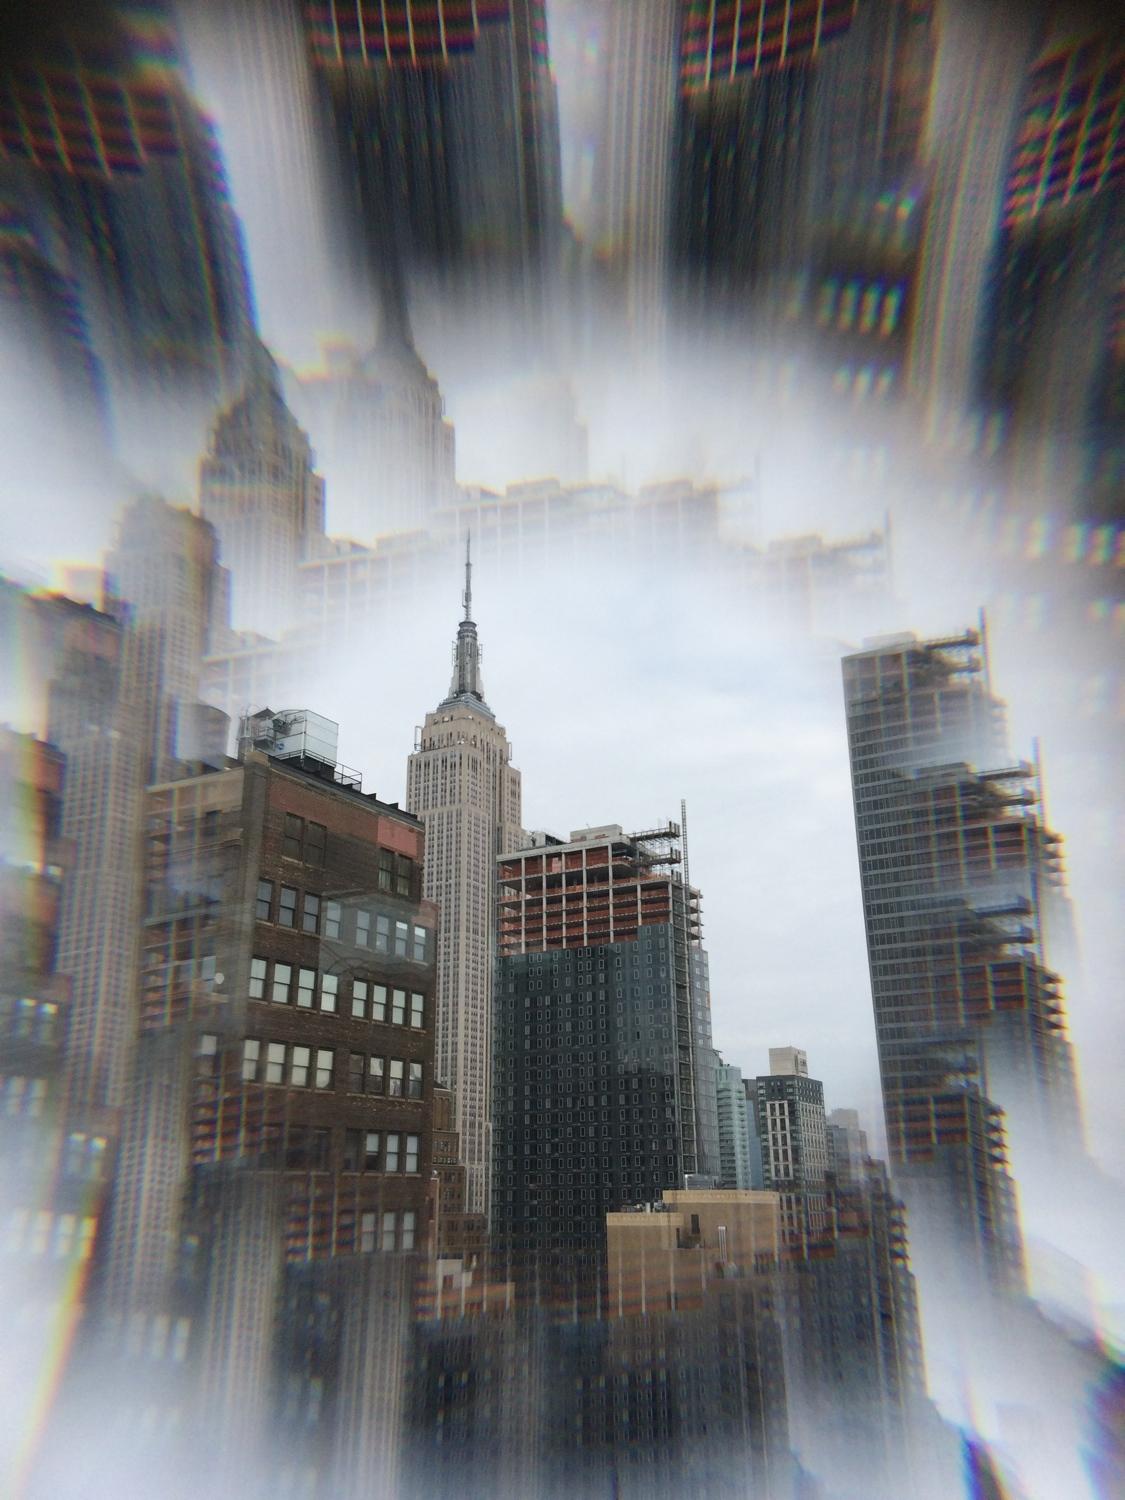 blurs arent defects but the charm in lensbabys new mobile lens kit lensbaby creative sample 16